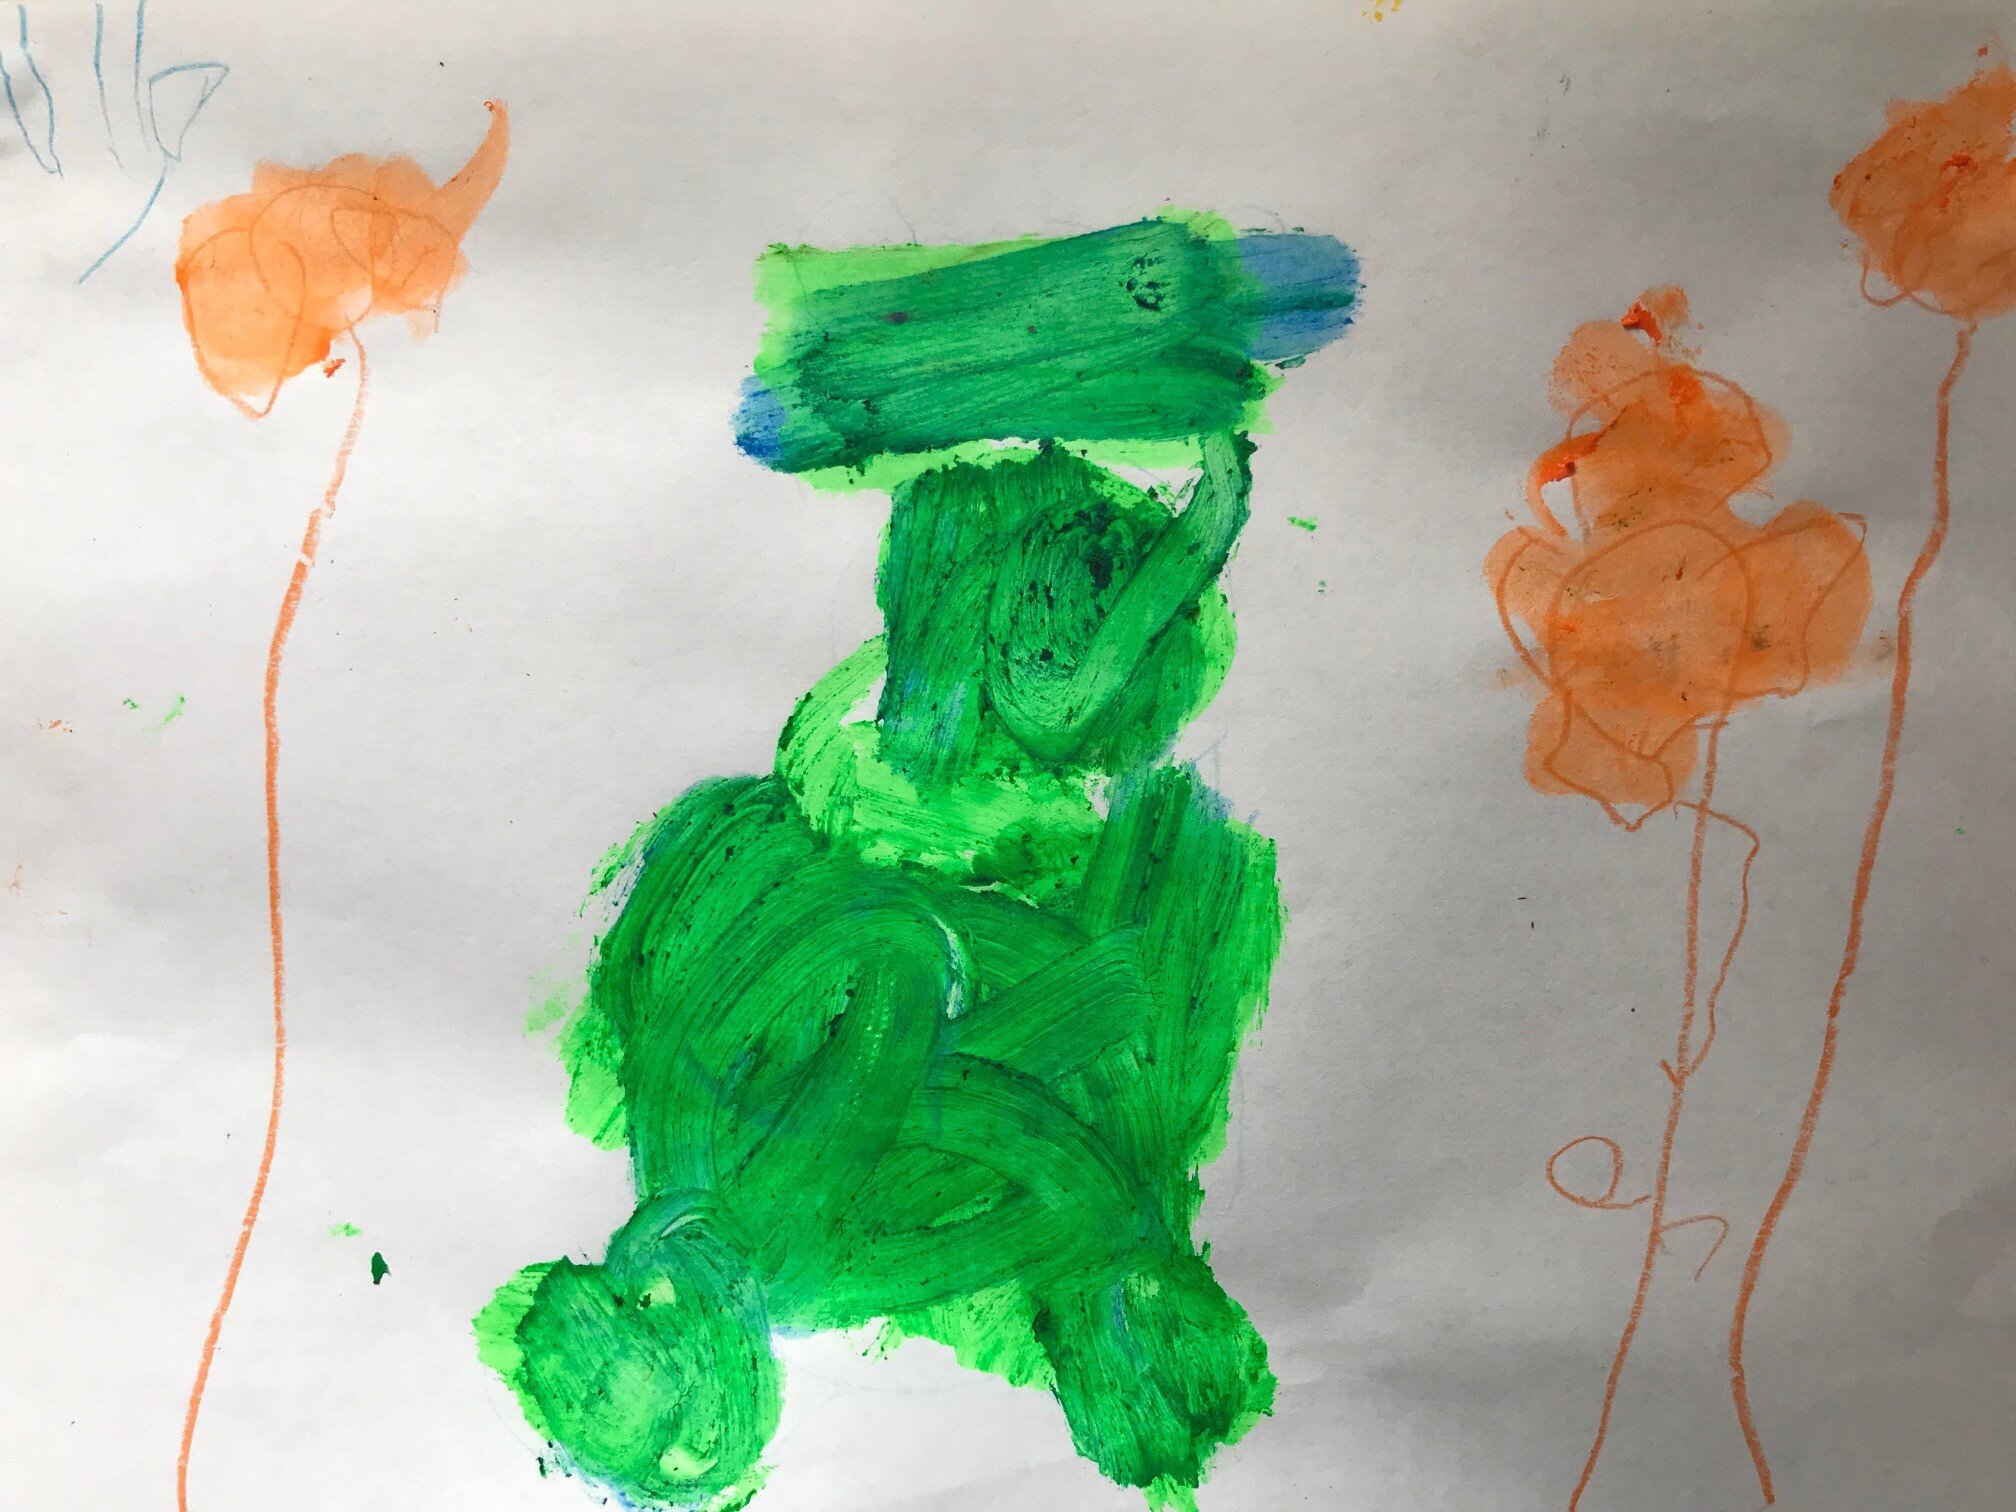 Po Teddy and Flowers by Ulla Nourse age 3